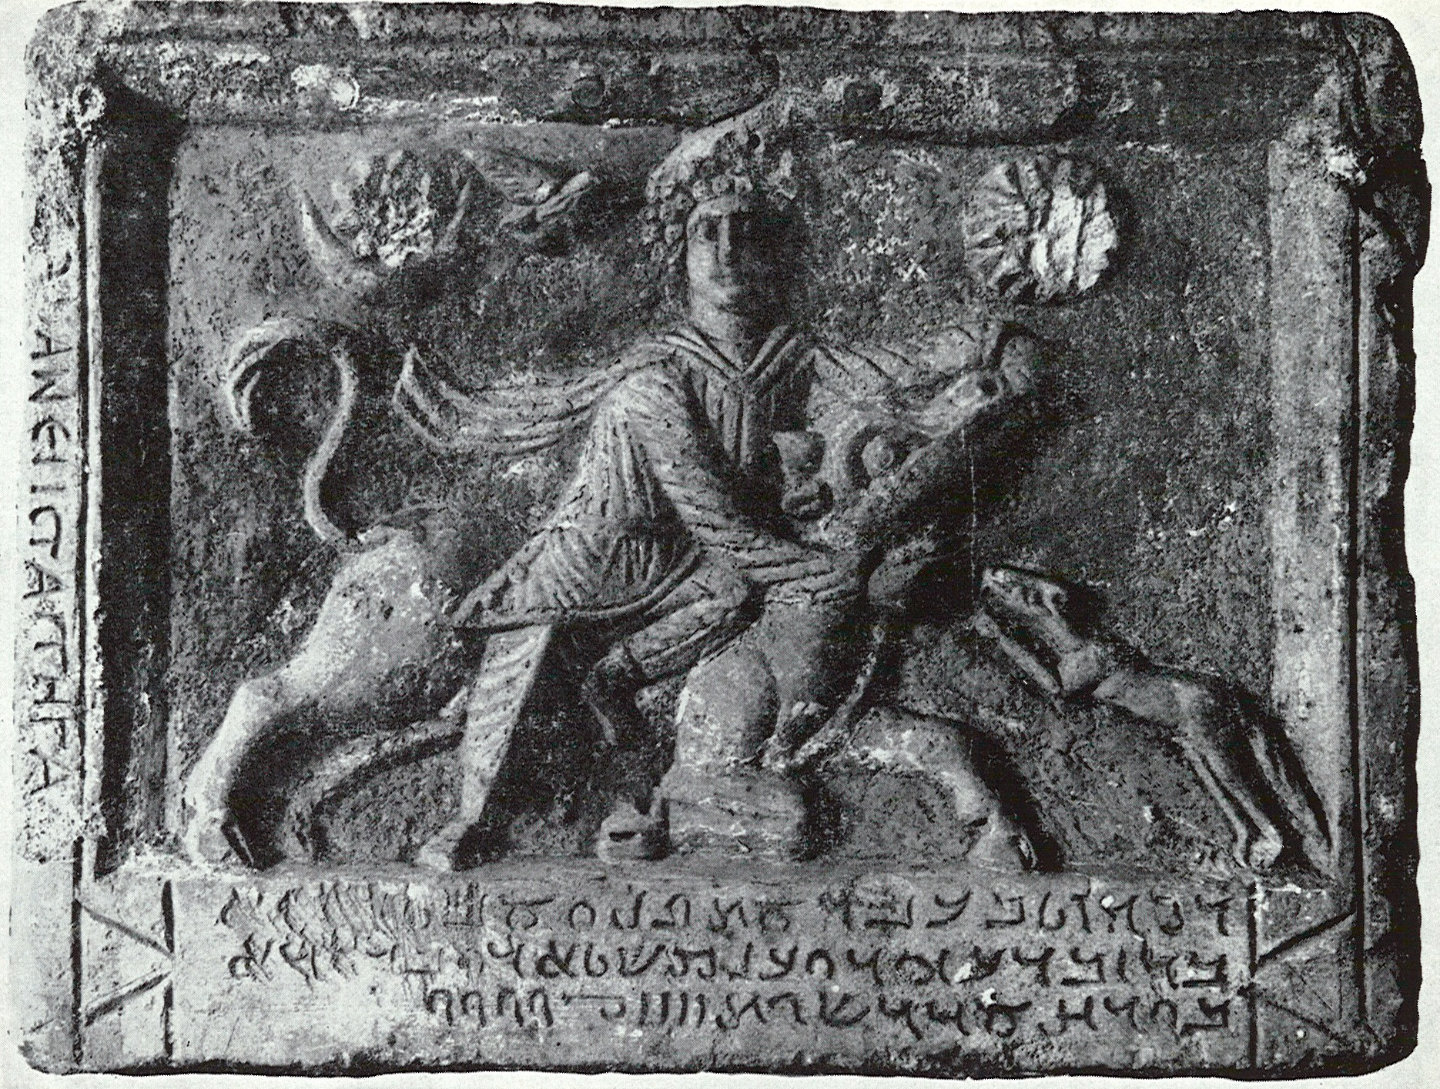 Second tauroctony from Dura Europos